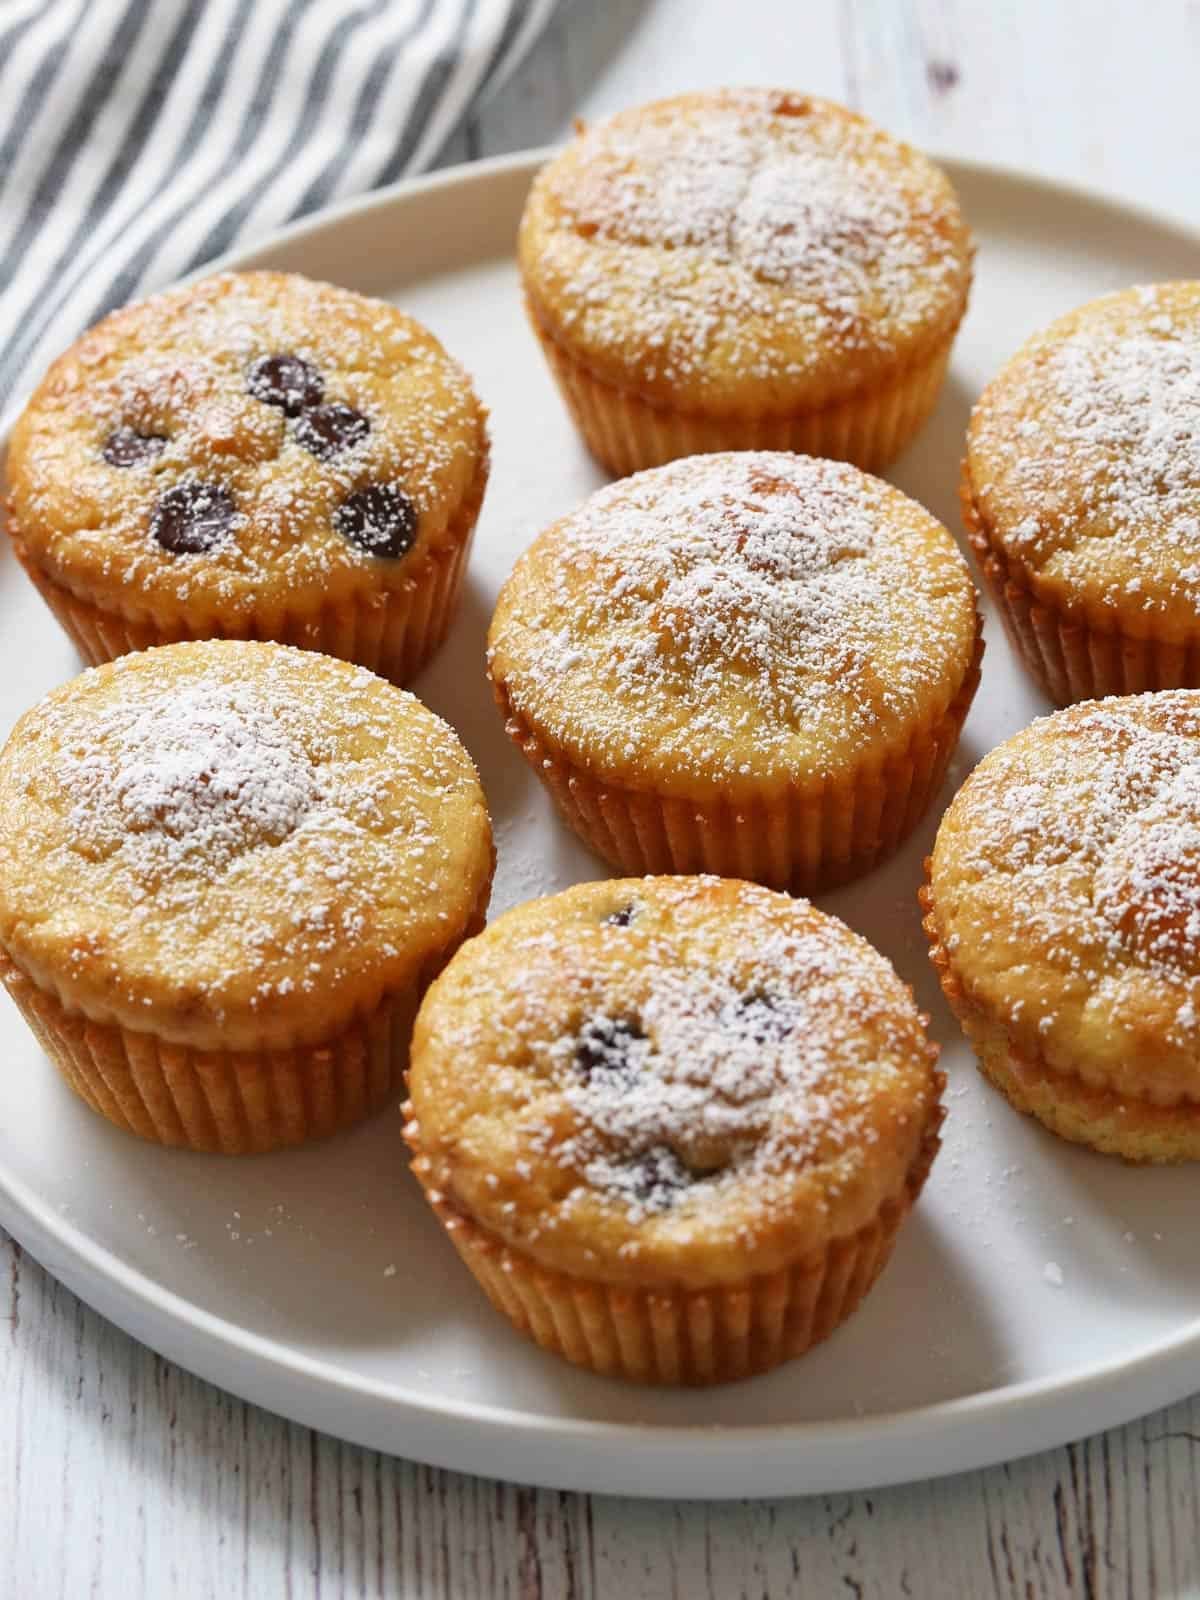 Almond flour muffins are served on a white plate.